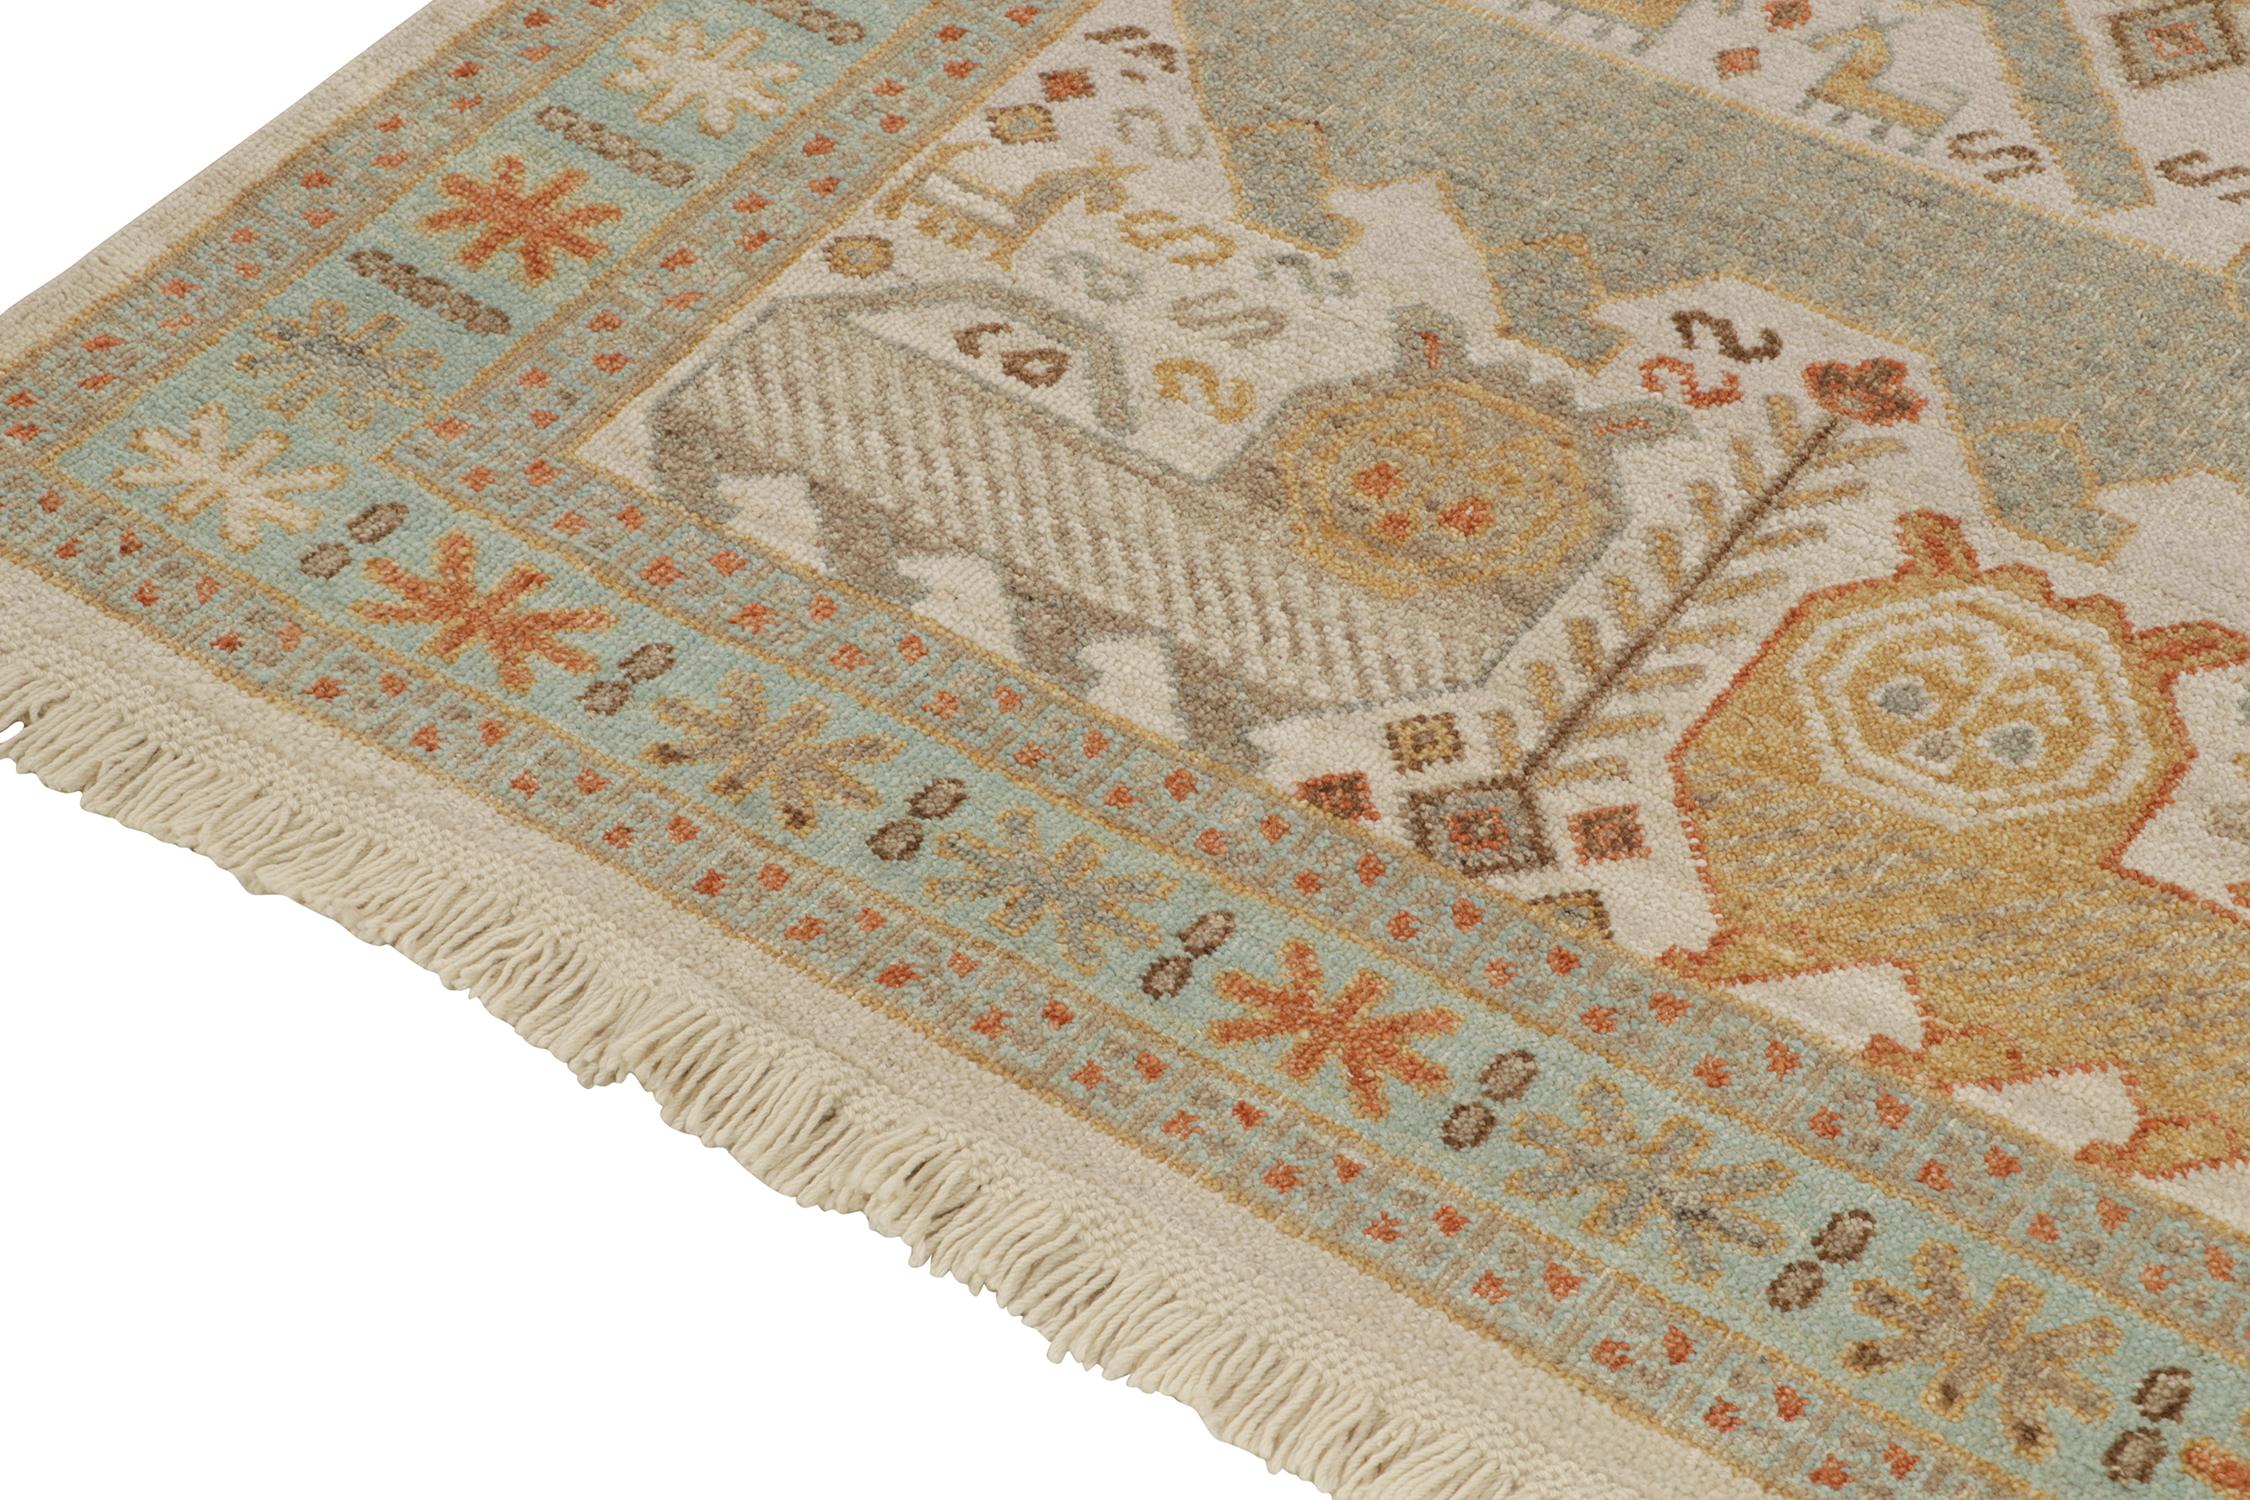 Contemporary Rug & Kilim’s Tribal Style Rug in Beige-Brown, Blue and Red Pictorials For Sale